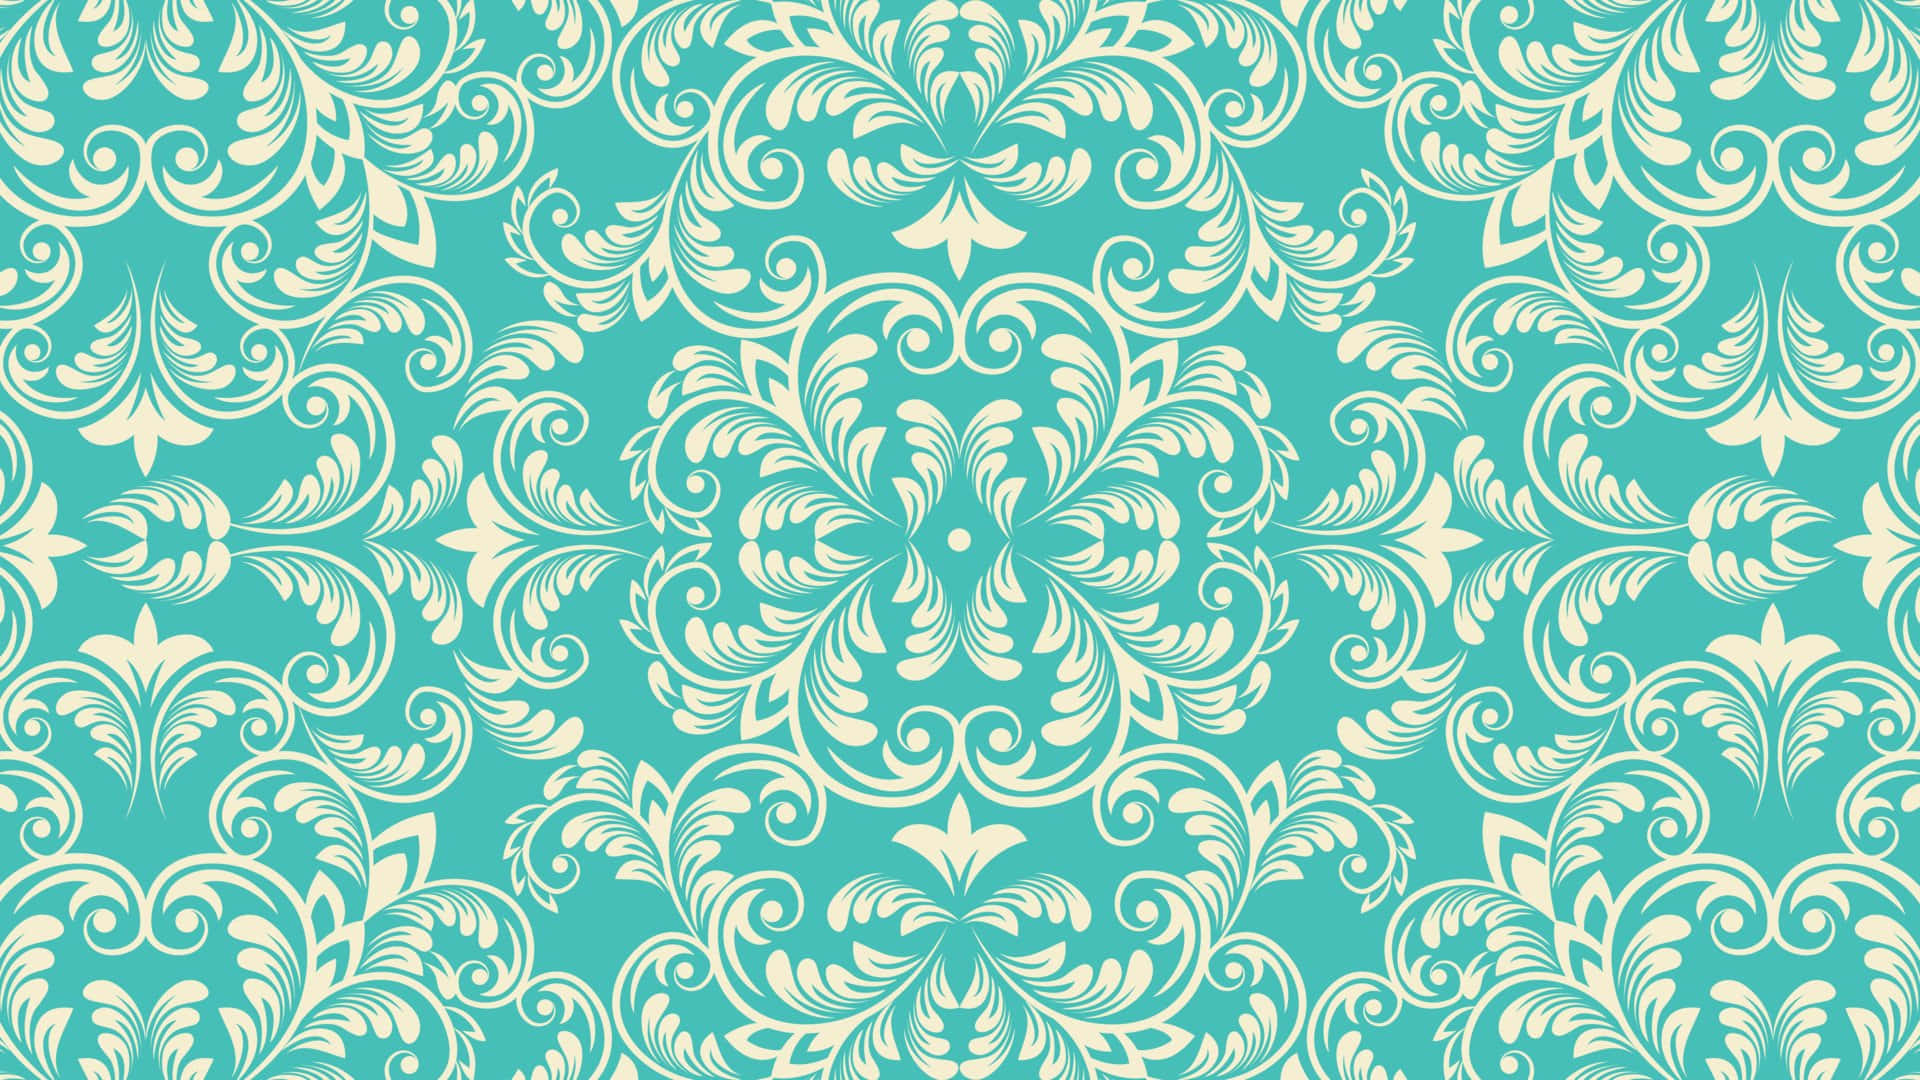 A Teal And White Floral Pattern